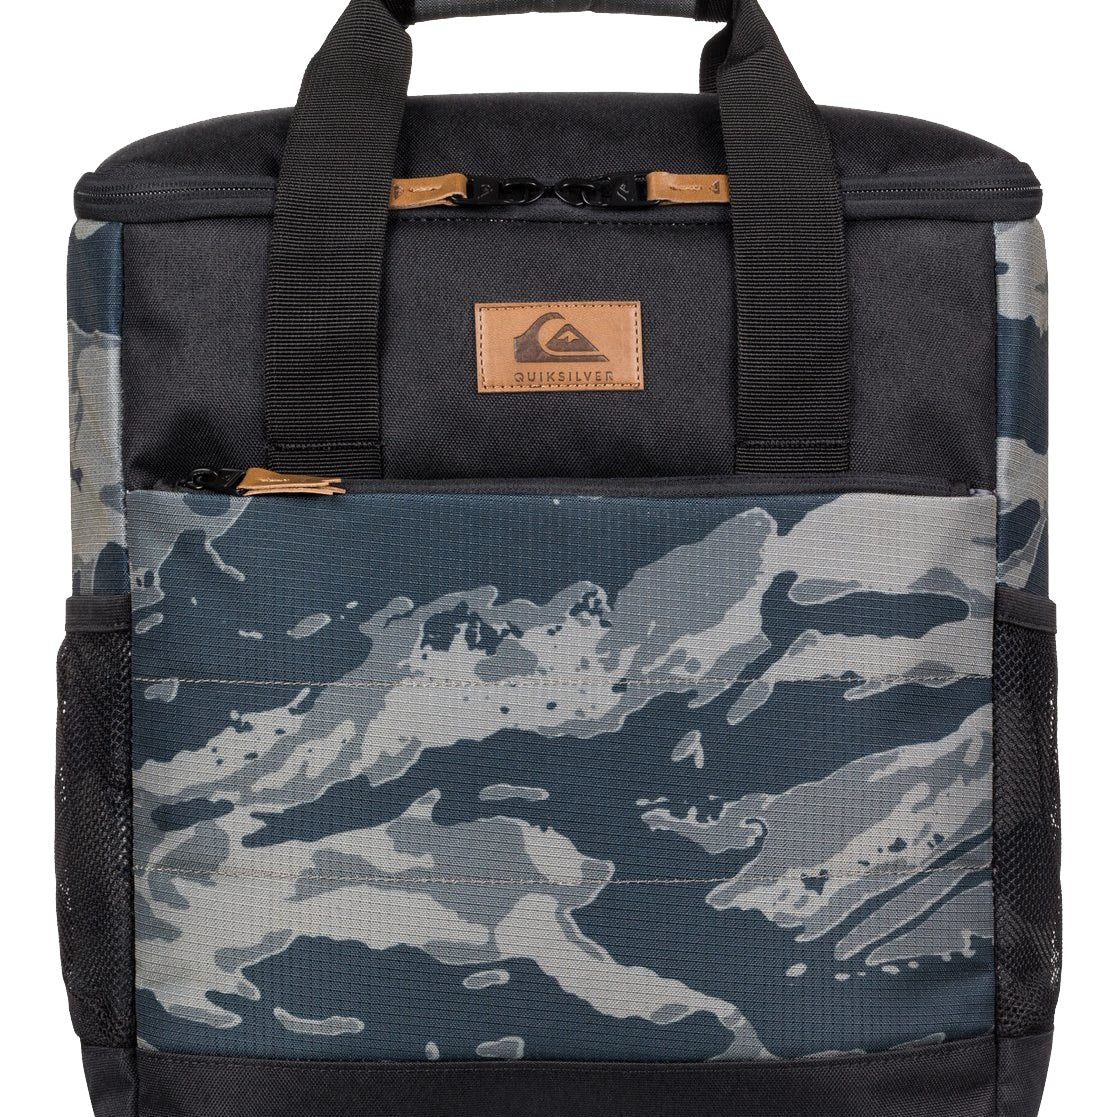 Quiksilver Seabeach 18L Insulated Cooler Backpack XCKK OS